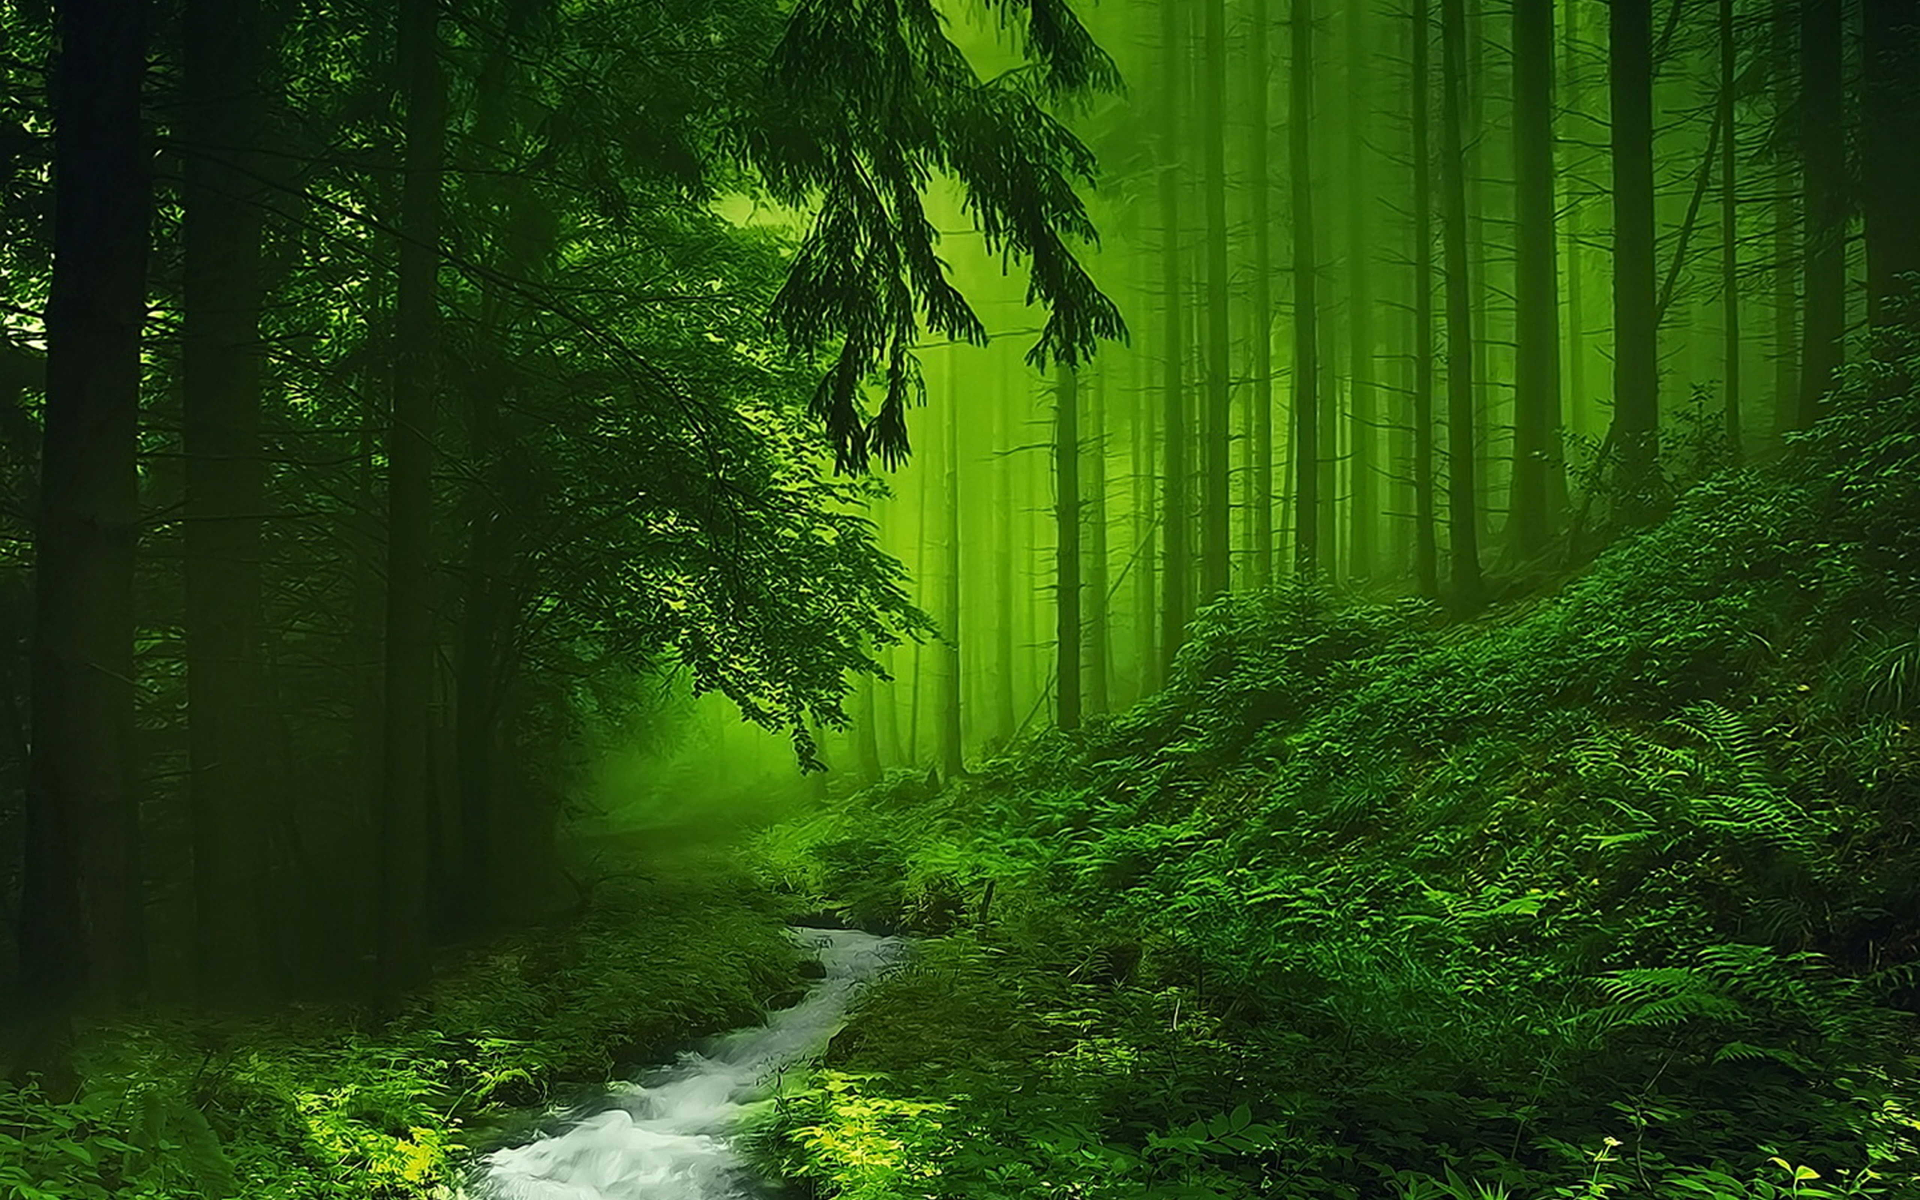 River In Green Misty Forest HD Wallpaper Background Image